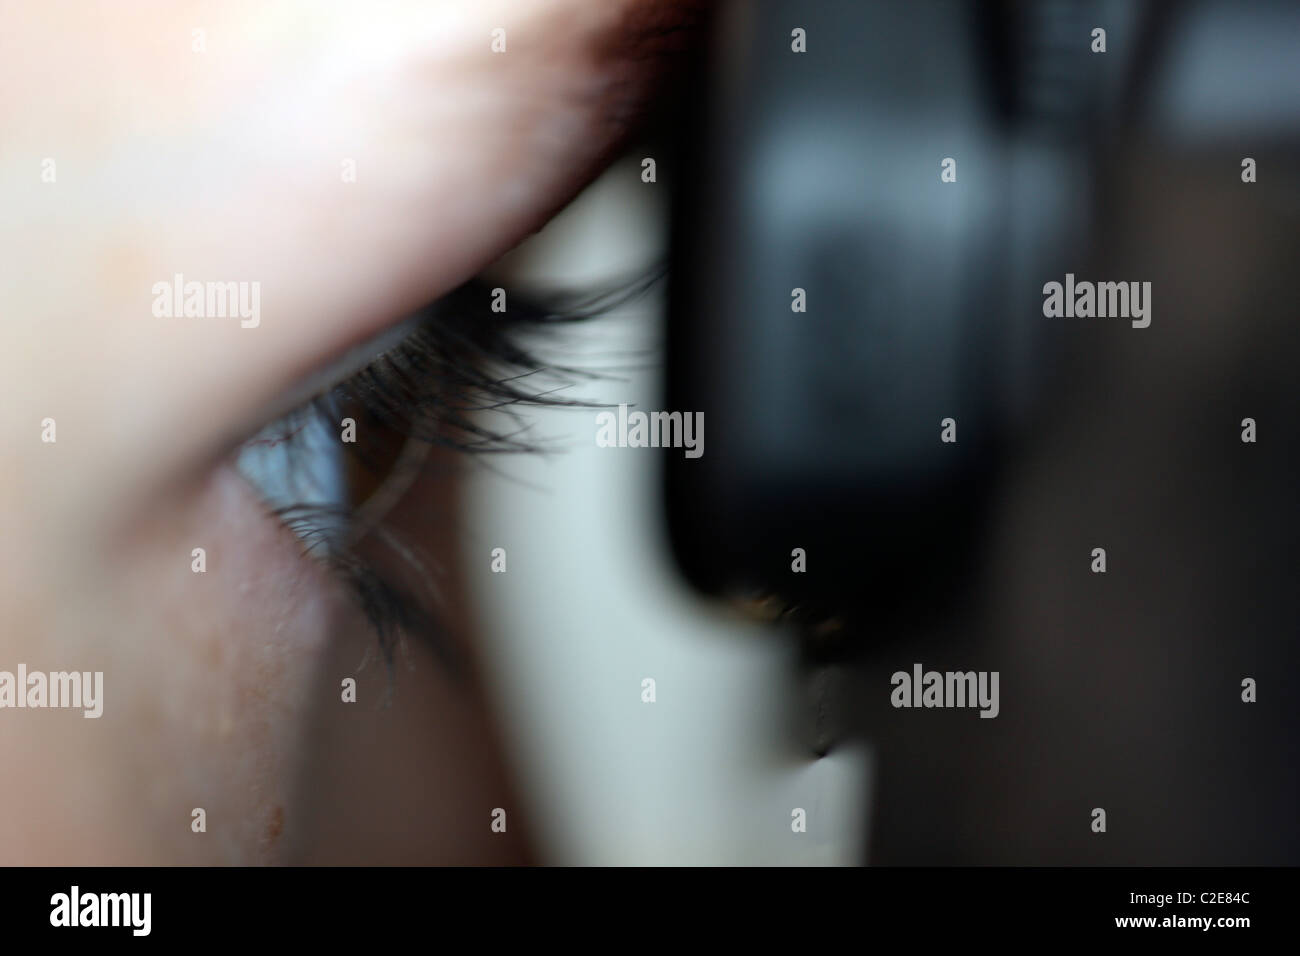 Person, female, looks through the viewfinder of a digital single lens reflex camera. Stock Photo